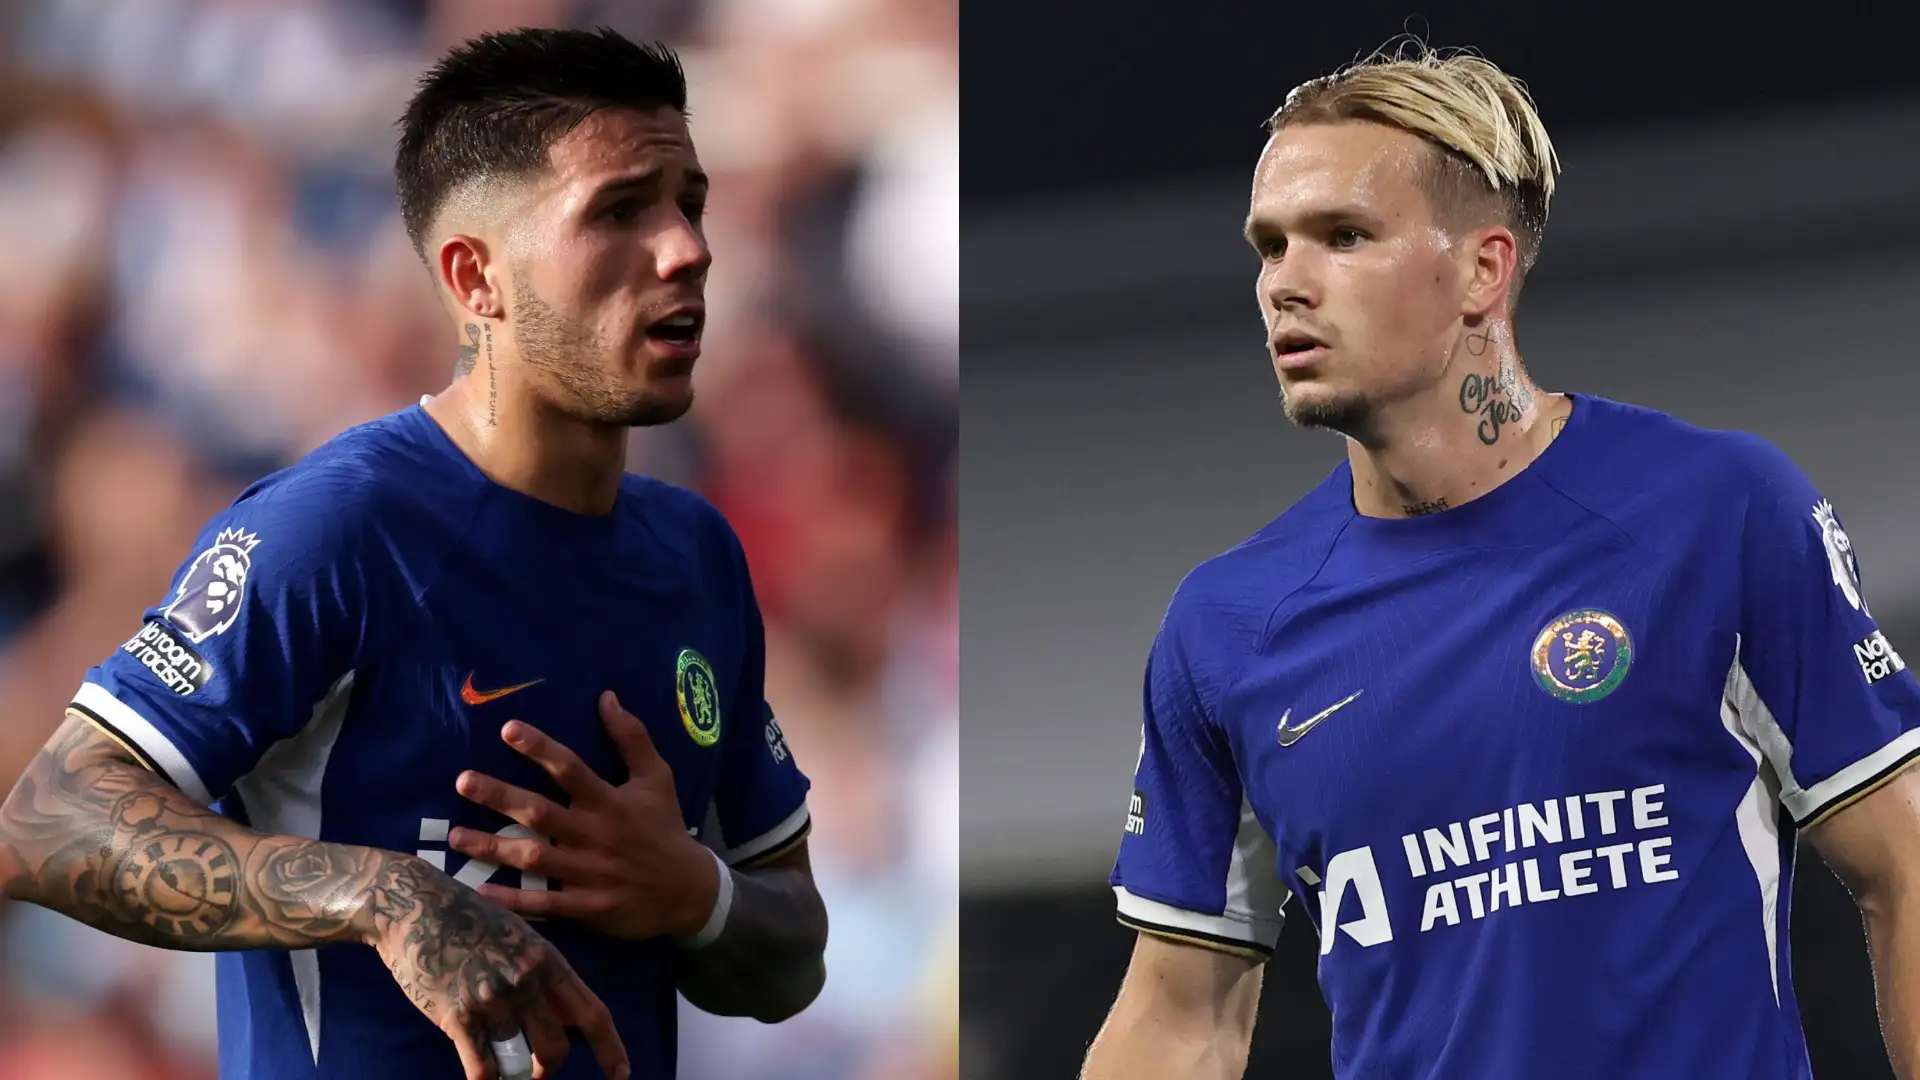 Why Chelsea have blocked Enzo Fernandez and Mykhailo Mudryk from starring at the 2024 Olympics – explained